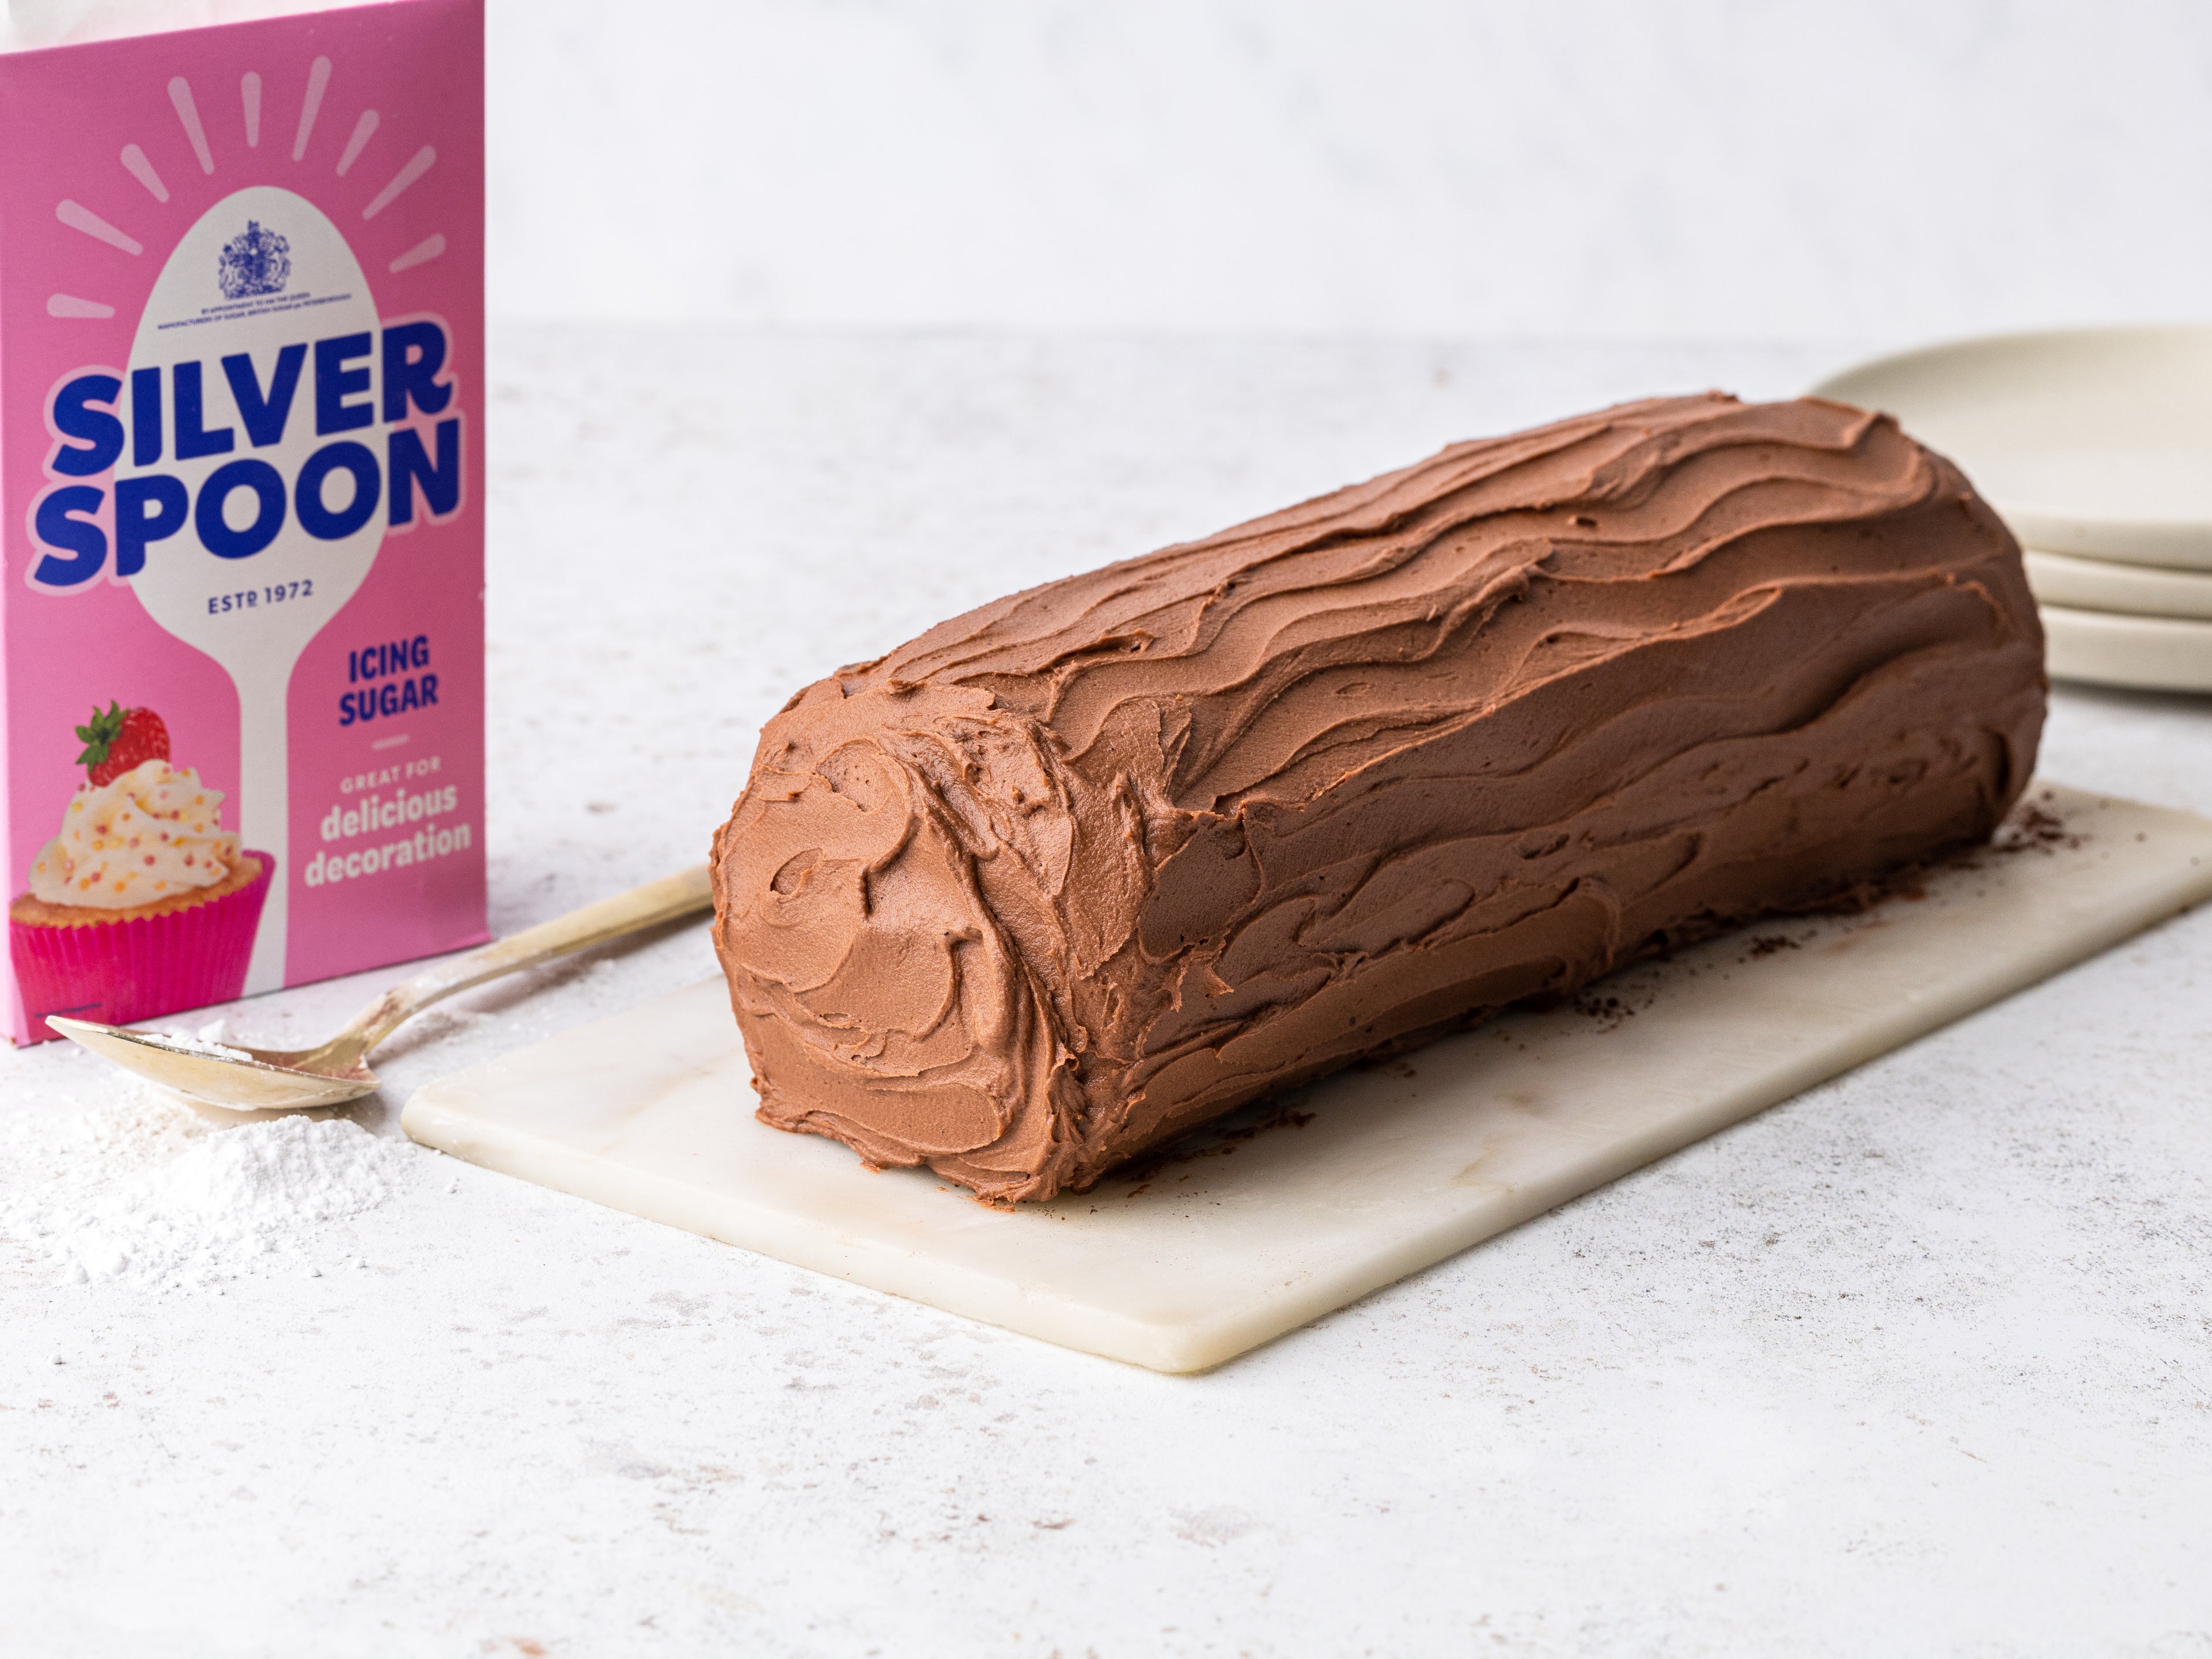 Chocolate yule log beside a box of Silver Spoon icing 